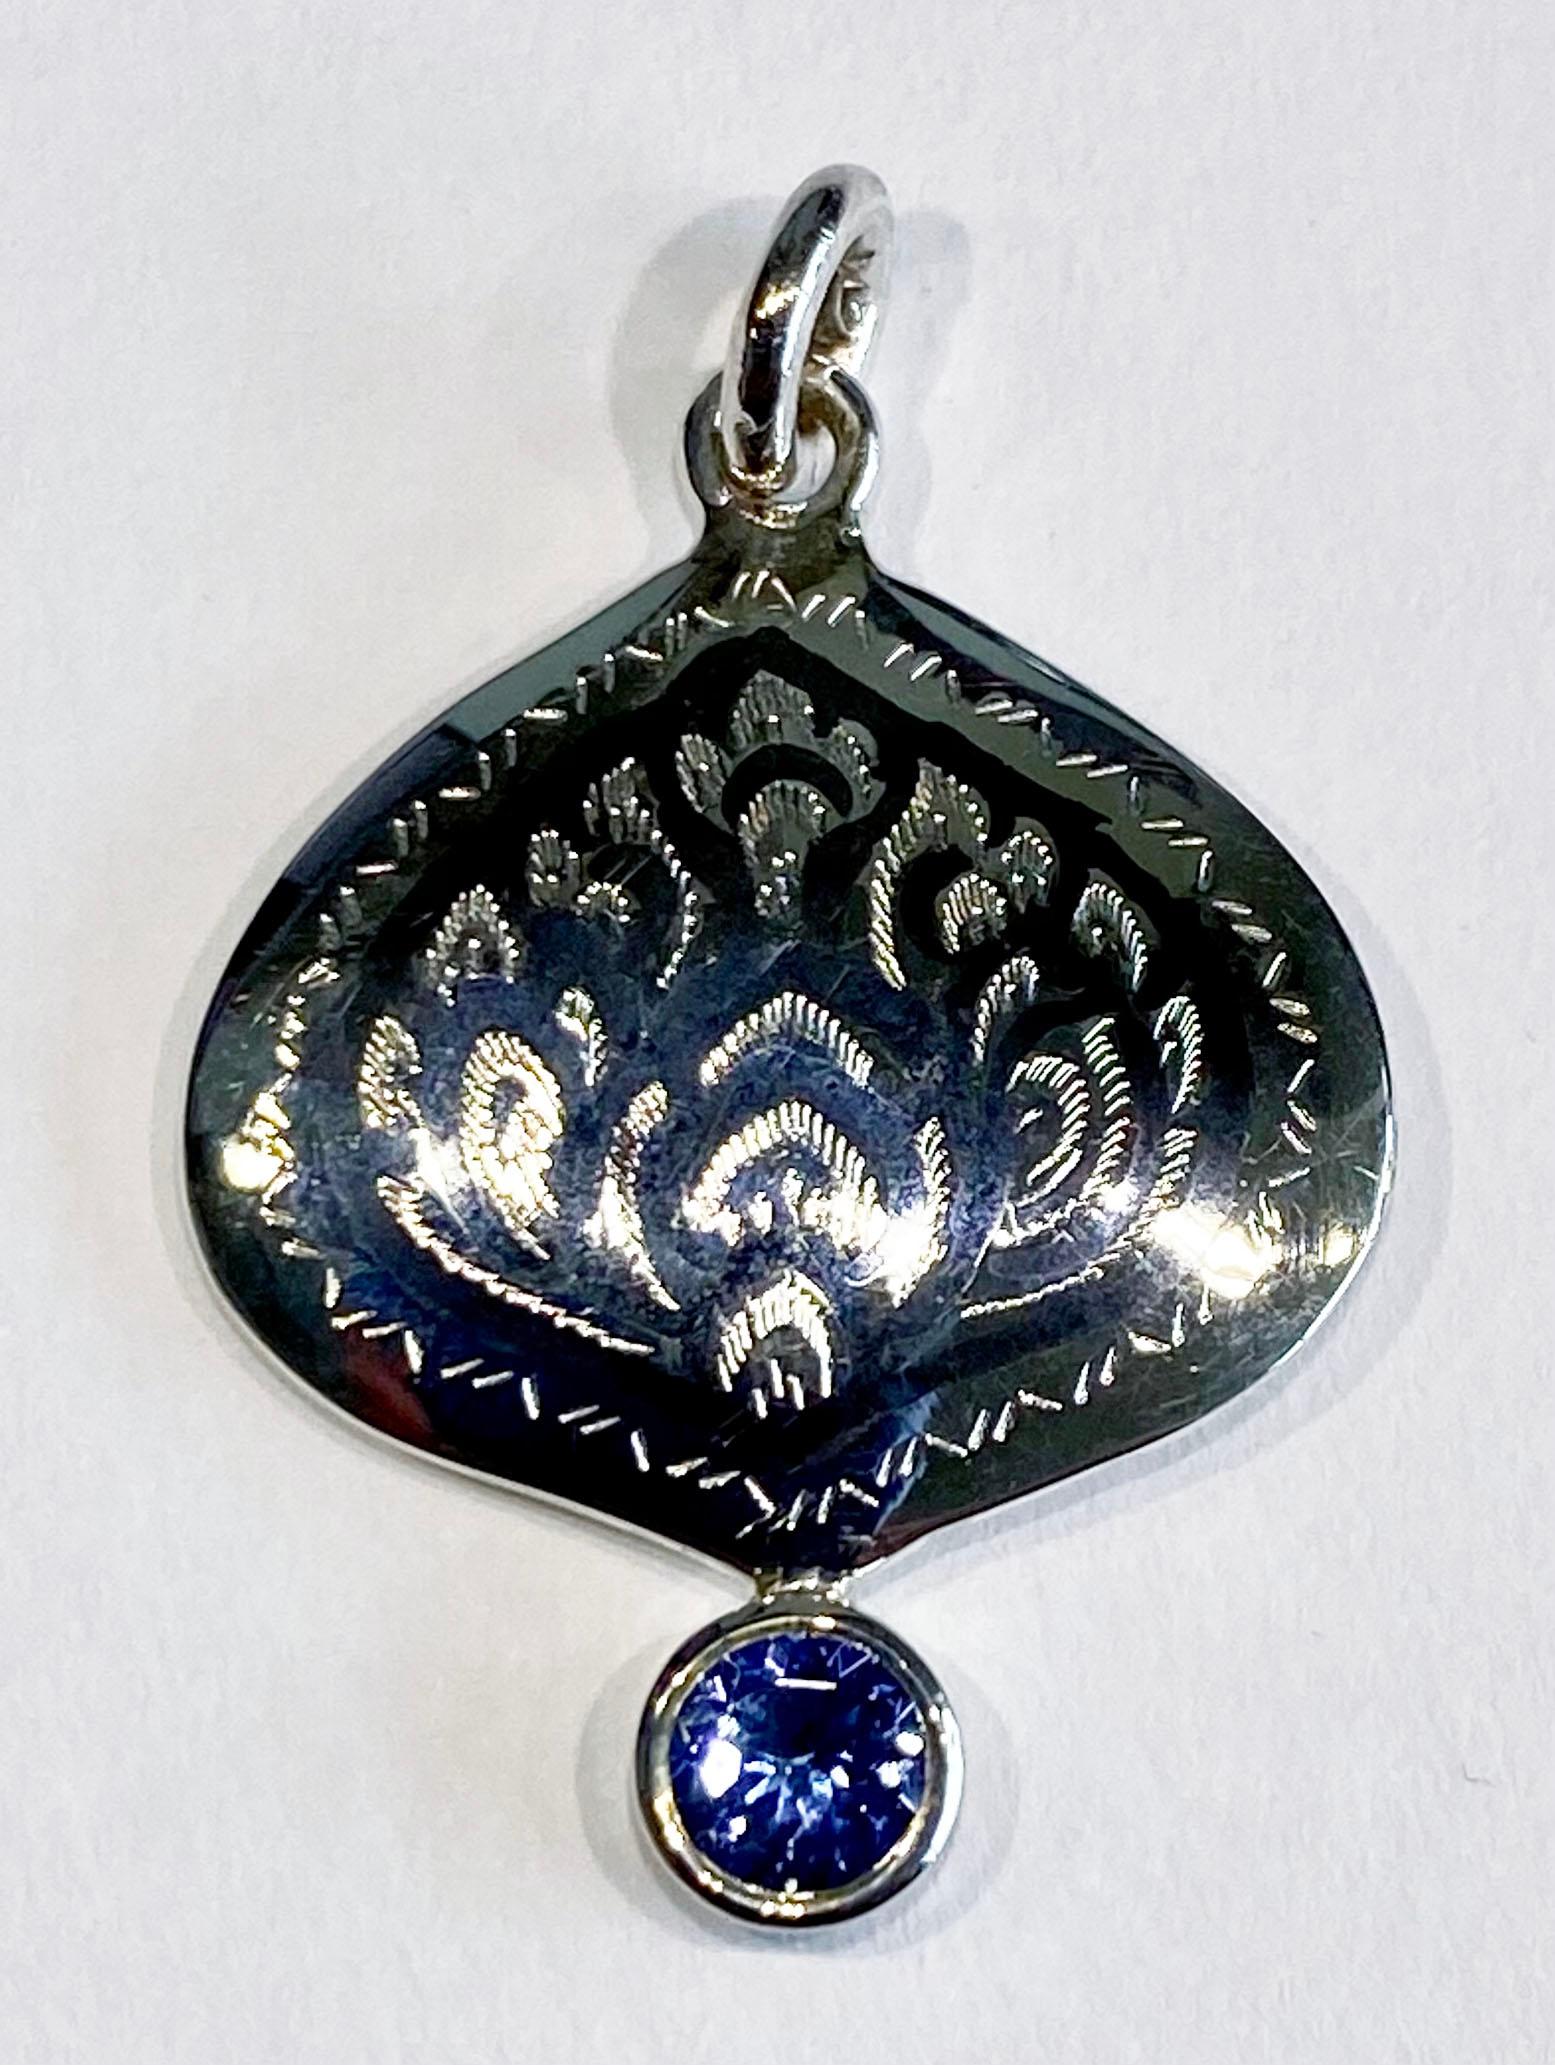 A Silver Filagree Pendant Accented with Tanzanite. The style of Silver work is called Nielloware and is a silver craft that comes from Southern Thailand. This is a one of a kind pendant accented with a 5MM Round Blue Tanzanite. The pendant hangs